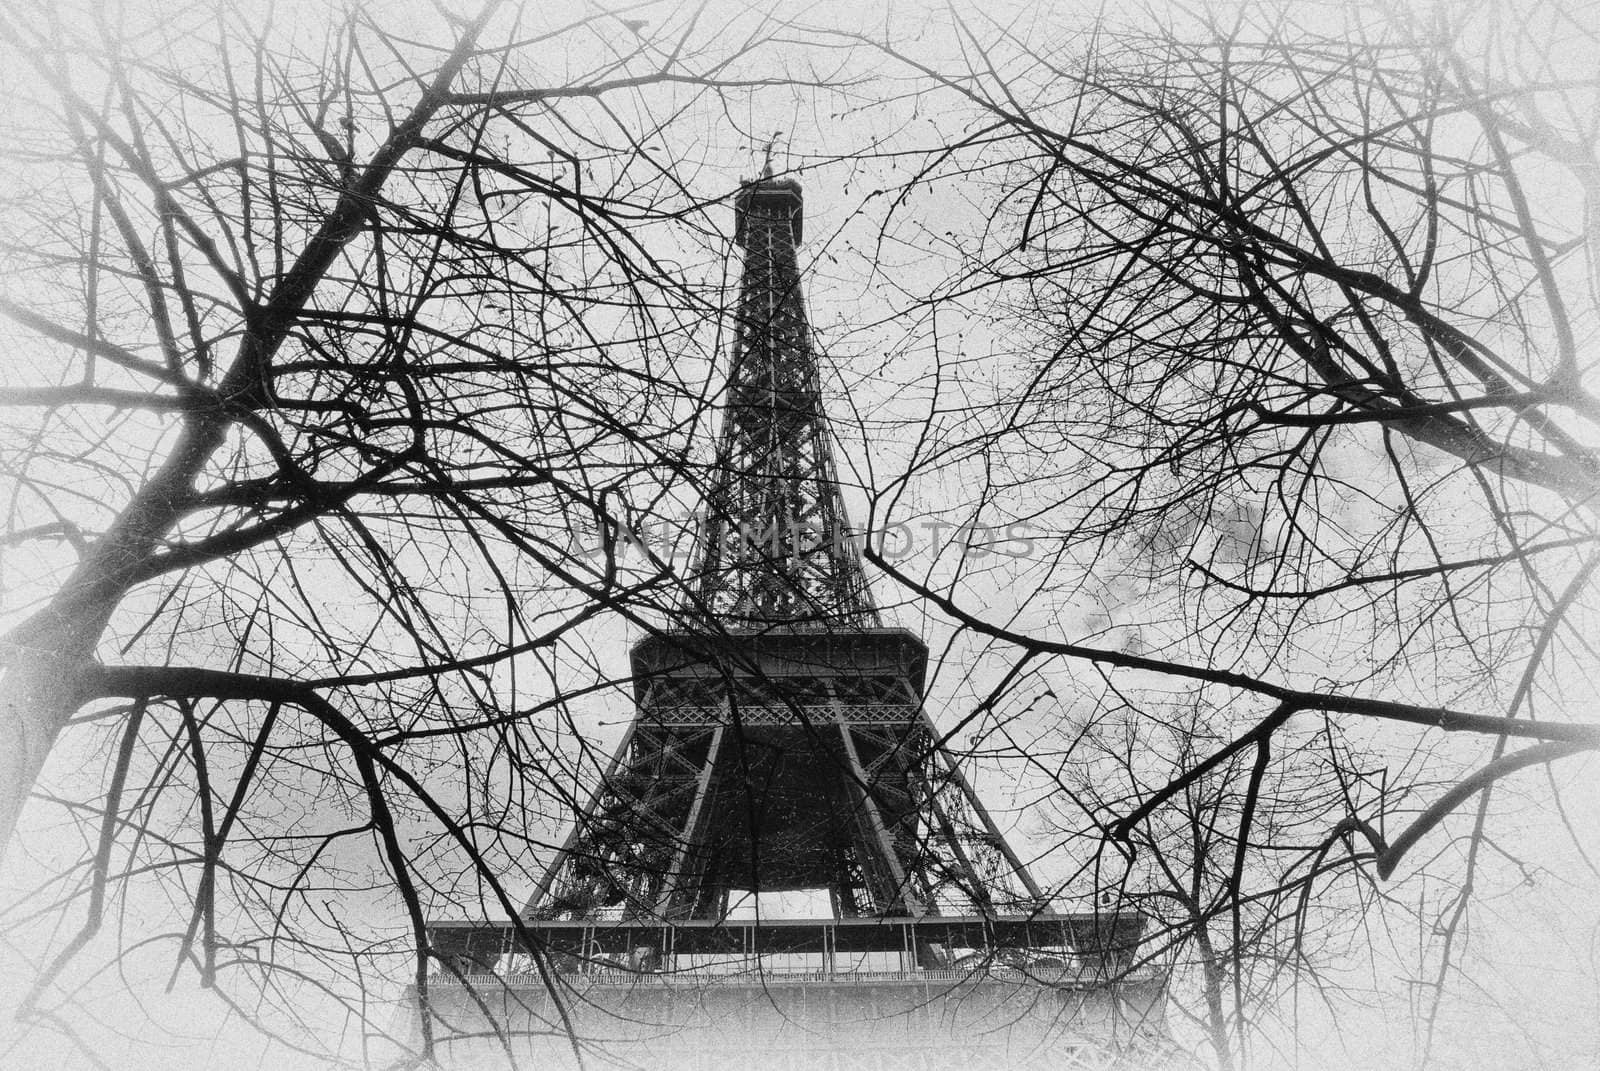 View to Eiffel tower throrhg leafless trees